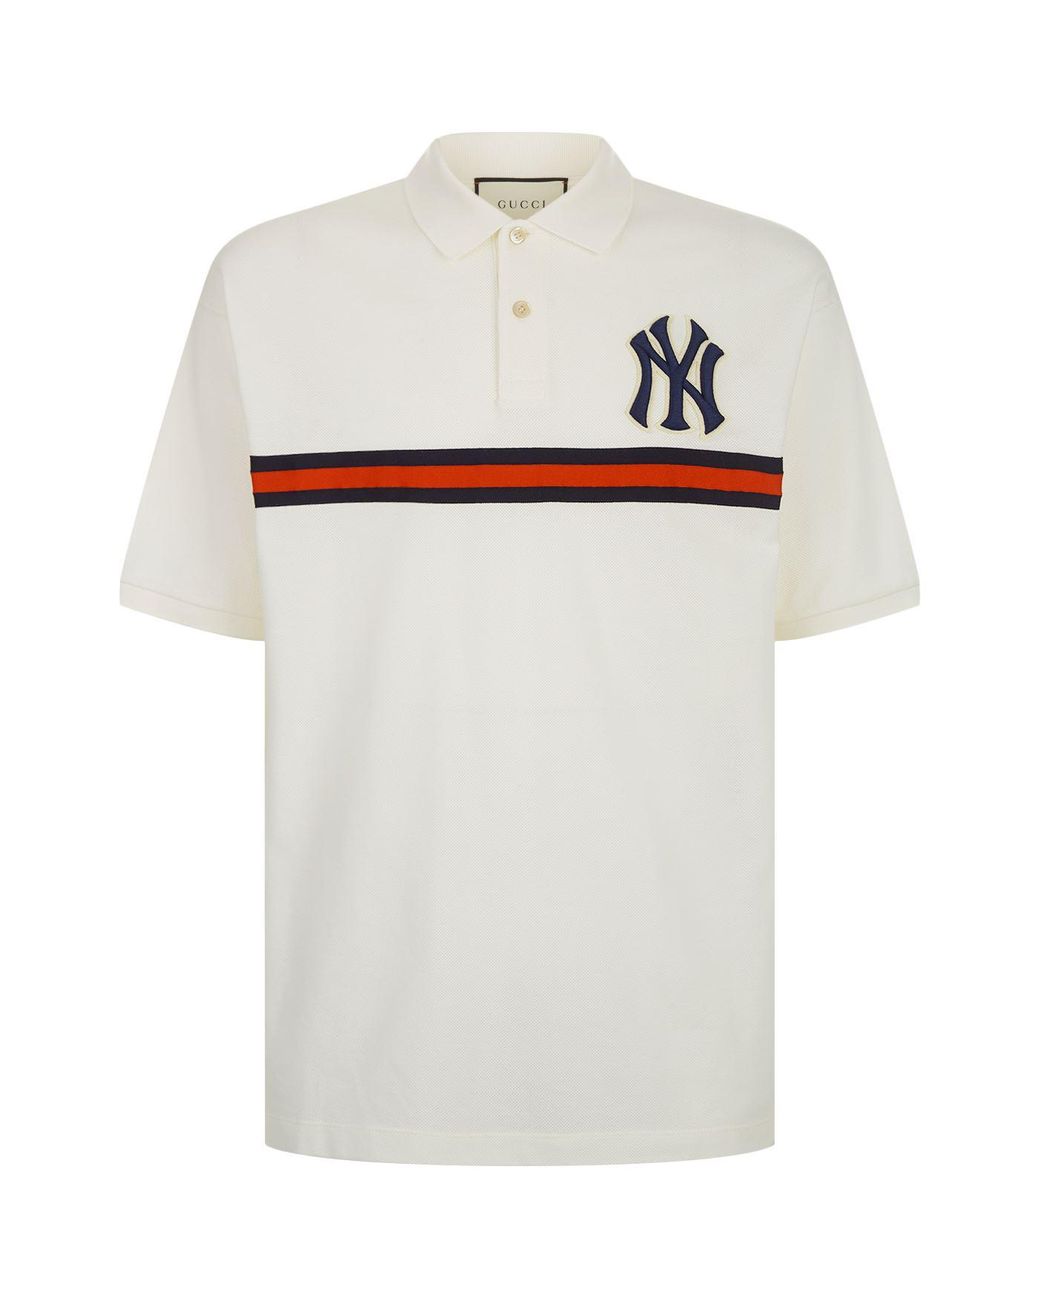 Gucci Ny Yankees Patch Polo Shirt in White for Men | Lyst